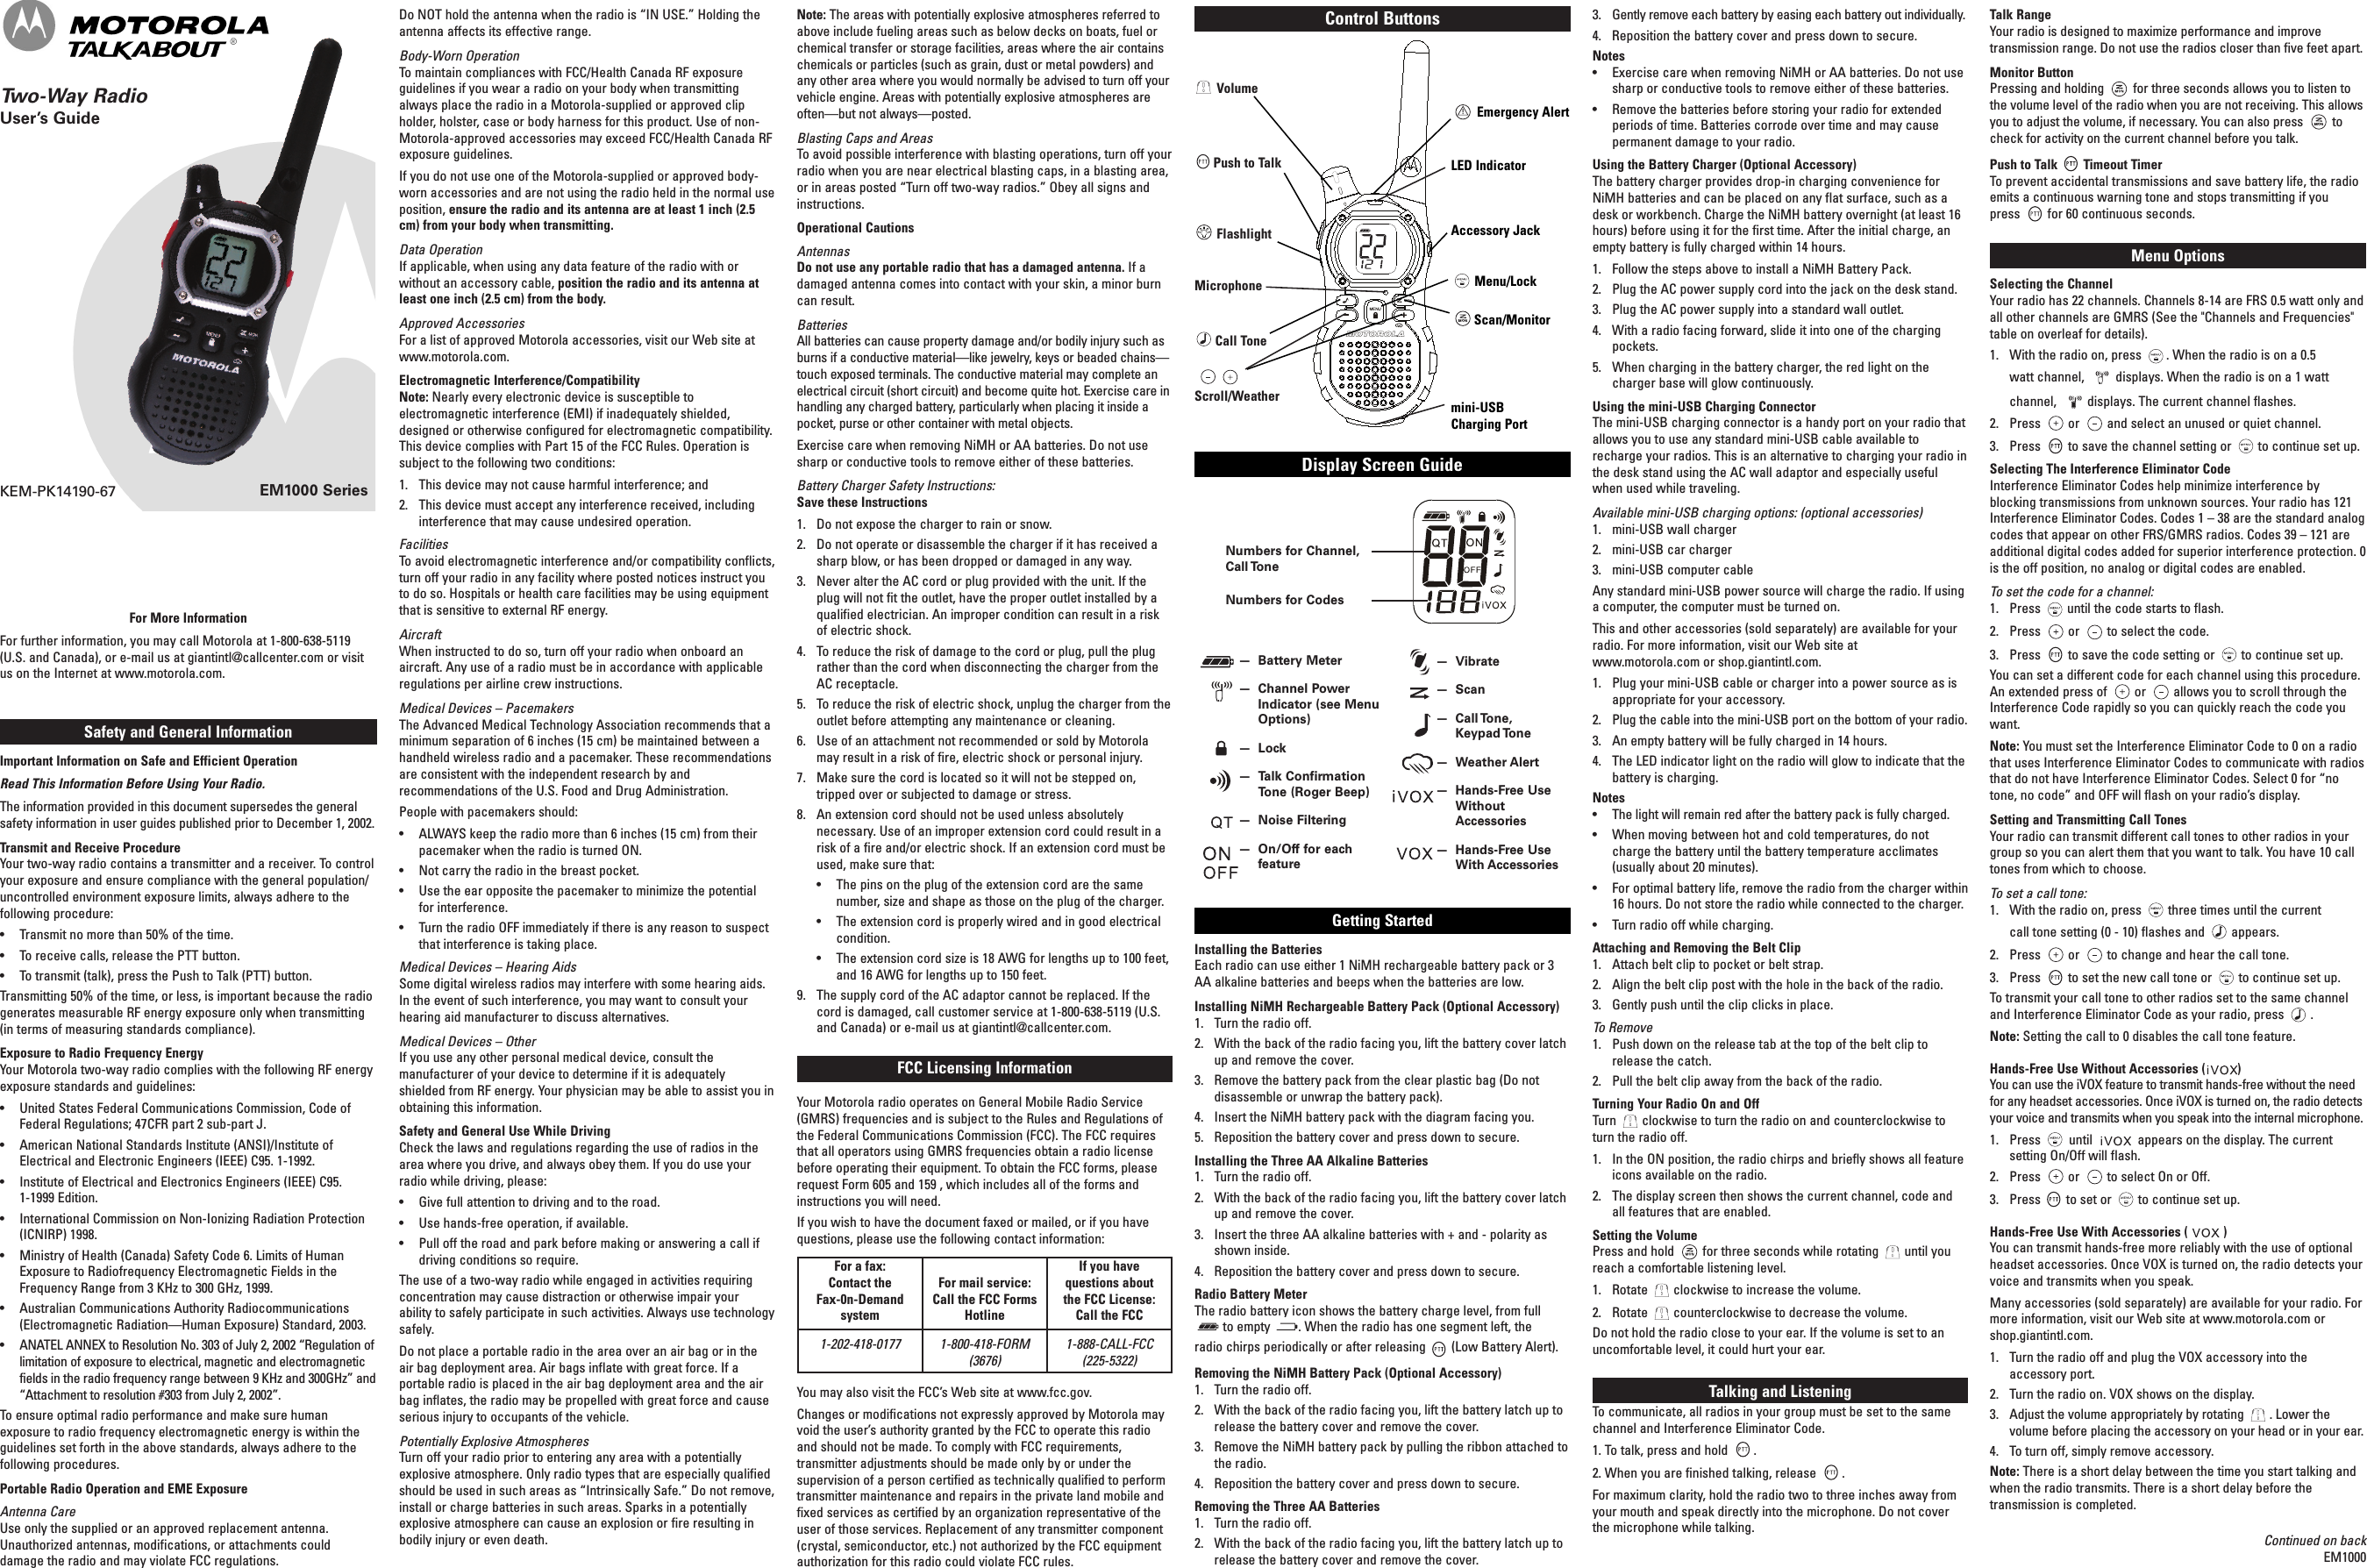 EM1000 SeriesKEM-PK14190-67Safety and General InformationImportant Information on Safe and Efficient OperationRead This Information Before Using Your Radio.The information provided in this document supersedes the generalsafety information in user guides published prior to December 1, 2002.Transmit and Receive ProcedureYour two-way radio contains a transmitter and a receiver. To controlyour exposure and ensure compliance with the general population/uncontrolled environment exposure limits, always adhere to thefollowing procedure:• Transmit no more than 50% of the time.• To receive calls, release the PTT button.• To transmit (talk), press the Push to Talk (PTT) button.Transmitting 50% of the time, or less, is important because the radiogenerates measurable RF energy exposure only when transmitting(in terms of measuring standards compliance).Exposure to Radio Frequency EnergyYour Motorola two-way radio complies with the following RF energyexposure standards and guidelines:•United States Federal Communications Commission, Code ofFederal Regulations; 47CFR part 2 sub-part J.•American National Standards Institute (ANSI)/Institute ofElectrical and Electronic Engineers (IEEE) C95. 1-1992.•Institute of Electrical and Electronics Engineers (IEEE) C95.1-1999 Edition.•International Commission on Non-Ionizing Radiation Protection(ICNIRP) 1998.•Ministry of Health (Canada) Safety Code 6. Limits of HumanExposure to Radiofrequency Electromagnetic Fields in theFrequency Range from 3 KHz to 300 GHz, 1999.•Australian Communications Authority Radiocommunications(Electromagnetic Radiation—Human Exposure) Standard, 2003.•ANATEL ANNEX to Resolution No. 303 of July 2, 2002 “Regulation oflimitation of exposure to electrical, magnetic and electromagneticfields in the radio frequency range between 9 KHz and 300GHz” and“Attachment to resolution #303 from July 2, 2002”.Toensure optimal radio performance and make sure humanexposure to radio frequency electromagnetic energy is within theguidelines set forth in the above standards, always adhere to thefollowing procedures.Portable Radio Operation and EME ExposureAntenna CareUse only the supplied or an approved replacement antenna.Unauthorized antennas, modifications, or attachments coulddamage the radio and may violate FCC regulations.Do NOT hold the antenna when the radio is “IN USE.” Holding theantenna affects its effective range.Body-Worn OperationTo maintain compliances with FCC/Health Canada RF exposureguidelines if you wear a radio on your body when transmittingalways place the radio in a Motorola-supplied or approved clipholder, holster, case or body harness for this product. Use of non-Motorola-approved accessories may exceed FCC/Health Canada RFexposure guidelines.If you do not use one of the Motorola-supplied or approved body-worn accessories and are not using the radio held in the normal useposition, ensure the radio and its antenna are at least 1 inch (2.5cm) from your body when transmitting.Data OperationIf applicable, when using any data feature of the radio with orwithout an accessory cable, position the radio and its antenna atleast one inch (2.5 cm) from the body.Approved AccessoriesFor a list of approved Motorola accessories, visit our Web site atwww.motorola.com.Electromagnetic Interference/CompatibilityNote: Nearly every electronic device is susceptible toelectromagnetic interference (EMI) if inadequately shielded,designed or otherwise configured for electromagnetic compatibility.This device complies with Part 15 of the FCC Rules. Operation issubject to the following two conditions:1. This device may not cause harmful interference; and2.  This device must accept any interference received, includinginterference that may cause undesired operation.FacilitiesTo avoid electromagnetic interference and/or compatibility conflicts,turn off your radio in any facility where posted notices instruct youto do so. Hospitals or health care facilities may be using equipmentthat is sensitive to external RF energy.AircraftWhen instructed to do so, turn off your radio when onboard anaircraft. Any use of a radio must be in accordance with applicableregulations per airline crew instructions.Medical Devices – PacemakersThe Advanced Medical Technology Association recommends that aminimum separation of 6 inches (15 cm) be maintained between ahandheld wireless radio and a pacemaker. These recommendationsare consistent with the independent research by andrecommendations of the U.S. Food and Drug Administration.People with pacemakers should:•ALWAYS keep the radio more than 6 inches (15 cm) from theirpacemaker when the radio is turned ON.•Not carry the radio in the breast pocket.•Use the ear opposite the pacemaker to minimize the potentialfor interference.•Turn the radio OFF immediately if there is any reason to suspectthat interference is taking place.Medical Devices – Hearing AidsSome digital wireless radios may interfere with some hearing aids.In the event of such interference, you may want to consult yourhearing aid manufacturer to discuss alternatives.Medical Devices – OtherIf you use any other personal medical device, consult themanufacturer of your device to determine if it is adequatelyshielded from RF energy. Your physician may be able to assist you inobtaining this information.Safety and General Use While DrivingCheck the laws and regulations regarding the use of radios in thearea where you drive, and always obey them. If you do use yourradio while driving, please:•Give full attention to driving and to the road.•Use hands-free operation, if available.•Pull off the road and park before making or answering a call ifdriving conditions so require.The use of a two-way radio while engaged in activities requiringconcentration may cause distraction or otherwise impair yourability to safely participate in such activities. Always use technologysafely.Do not place a portable radio in the area over an air bag or in theair bag deployment area. Air bags inflate with great force. If aportable radio is placed in the air bag deployment area and the airbag inflates, the radio may be propelled with great force and causeserious injury to occupants of the vehicle.Potentially Explosive AtmospheresTurn off your radio prior to entering any area with a potentiallyexplosive atmosphere. Only radio types that are especially qualifiedshould be used in such areas as “Intrinsically Safe.” Do not remove,install or charge batteries in such areas. Sparks in a potentiallyexplosive atmosphere can cause an explosion or fire resulting inbodily injury or even death.For More InformationFor further information, you may call Motorola at 1-800-638-5119(U.S. and Canada), or e-mail us at giantintl@callcenter.com or visitus on the Internet at www.motorola.com.Note: The areas with potentially explosive atmospheres referred toabove include fueling areas such as below decks on boats, fuel orchemical transfer or storage facilities, areas where the air containschemicals or particles (such as grain, dust or metal powders) andany other area where you would normally be advised to turn off yourvehicle engine. Areas with potentially explosive atmospheres areoften—but not always—posted.Blasting Caps and AreasTo avoid possible interference with blasting operations, turn off yourradio when you are near electrical blasting caps, in a blasting area,orin areas posted “Turn off two-way radios.” Obey all signs andinstructions.Operational CautionsAntennasDo not use any portable radio that has a damaged antenna. If adamaged antenna comes into contact with your skin, a minor burncan result.BatteriesAll batteries can cause property damage and/or bodily injury such asburns if a conductive material—like jewelry, keys or beaded chains—touch exposed terminals. The conductive material may complete anelectrical circuit (short circuit) and become quite hot. Exercise care inhandling any charged battery, particularly when placing it inside apocket, purse or other container with metal objects.Exercise care when removing NiMH or AA batteries. Do not usesharp or conductive tools to remove either of these batteries.Battery Charger Safety Instructions:Save these Instructions1.  Do not expose the charger to rain or snow.2.  Do not operate or disassemble the charger if it has received asharp blow, or has been dropped or damaged in any way.3.  Never alter the AC cord or plug provided with the unit. If theplug will not fit the outlet, have the proper outlet installed by aqualified electrician. An improper condition can result in a riskof electric shock.4.  To reduce the risk of damage to the cord or plug, pull the plugrather than the cord when disconnecting the charger from theAC receptacle.5.Toreduce the risk of electric shock, unplug the charger from theoutlet before attempting any maintenance or cleaning.6.  Use of an attachment not recommended or sold by Motorolamay result in a risk of fire, electric shock or personal injury.7.  Make sure the cord is located so it will not be stepped on,tripped over or subjected to damage or stress.8.  An extension cord should not be used unless absolutelynecessary. Use of an improper extension cord could result in arisk of a fire and/or electric shock. If an extension cord must beused, make sure that:•The pins on the plug of the extension cord are the samenumber, size and shape as those on the plug of the charger.•The extension cord is properly wired and in good electricalcondition.•The extension cord size is 18 AWG for lengths up to 100 feet,and 16 AWG for lengths up to 150 feet.9.  The supply cord of the AC adaptor cannot be replaced. If thecord is damaged, call customer service at 1-800-638-5119 (U.S.and Canada) or e-mail us at giantintl@callcenter.com.FCC Licensing InformationYour Motorola radio operates on General Mobile Radio Service(GMRS) frequencies and is subject to the Rules and Regulations ofthe Federal Communications Commission (FCC). The FCC requiresthat all operators using GMRS frequencies obtain a radio licensebefore operating their equipment. To obtain the FCC forms, pleaserequest Form 605 and 159 , which includes all of the forms andinstructions you will need.If you wish to have the document faxed or mailed, or if you havequestions, please use the following contact information:You may also visit the FCC’s Web site at www.fcc.gov.Changes or modifications not expressly approved by Motorola mayvoid the user’s authority granted by the FCC to operate this radioand should not be made. To comply with FCC requirements,transmitter adjustments should be made only by or under thesupervision of a person certified as technically qualified to performtransmitter maintenance and repairs in the private land mobile andfixed services as certified by an organization representative of theuser of those services. Replacement of any transmitter component(crystal, semiconductor, etc.) not authorized by the FCC equipmentauthorization for this radio could violate FCC rules.®3.  Gently remove each battery by easing each battery out individually.4.Reposition the battery cover and press down to secure.Notes• Exercise care when removing NiMH or AA batteries. Do not usesharp or conductive tools to remove either of these batteries.•Remove the batteries before storing your radio for extendedperiods of time. Batteries corrode over time and may causepermanent damage to your radio.Using the Battery Charger (Optional Accessory)The battery charger provides drop-in charging convenience forNiMH batteries and can be placed on any flat surface, such as adesk or workbench. Charge the NiMH battery overnight (at least 16hours) before using it for the first time. After the initial charge, anempty battery is fully charged within 14 hours.1.  Follow the steps above to install a NiMH Battery Pack.2.  Plug the AC power supply cord into the jack on the desk stand.3.  Plug the AC power supply into a standard wall outlet.4.With a radio facing forward, slide it into one of the chargingpockets.5.  When charging in the battery charger, the red light on thecharger base will glow continuously.Using the mini-USB Charging Connector The mini-USB charging connector is a handy port on your radio thatallows you to use any standard mini-USB cable available torecharge your radios. This is an alternative to charging your radio inthe desk stand using the AC wall adaptor and especially usefulwhen used while traveling. Available mini-USB charging options: (optional accessories)1. mini-USB wall charger2. mini-USB car charger3. mini-USB computer cableAny standard mini-USB power source will charge the radio. If usingacomputer, the computer must be turned on.This and other accessories (sold separately) are available for yourradio. For more information, visit our Web site atwww.motorola.com or shop.giantintl.com.1. Plug your mini-USB cable or charger into a power source as isappropriate for your accessory. 2. Plug the cable into the mini-USB port on the bottom of your radio.3. An empty battery will be fully charged in 14 hours.4. The LED indicator light on the radio will glow to indicate that thebattery is charging.Notes• The light will remain red after the battery pack is fully charged.• When moving between hot and cold temperatures, do notcharge the battery until the battery temperature acclimates(usually about 20 minutes).• For optimal battery life, remove the radio from the charger within16 hours. Do not store the radio while connected to the charger.• Turn radio off while charging.Attaching and Removing the Belt Clip1.  Attach belt clip to pocket or belt strap.2.  Align the belt clip post with the hole in the back of the radio.3.  Gently push until the clip clicks in place.To Remove1.  Push down on the release tab at the top of the belt clip torelease the catch.2.  Pull the belt clip away from the back of the radio.Turning Your Radio On and OffTurn clockwise to turn the radio on and counterclockwise toturn the radio off.1.  In the ON position, the radio chirps and briefly shows all featureicons available on the radio.2.  The display screen then shows the current channel, code andall features that are enabled.Setting the VolumePress and hold for three seconds while rotating until youreach a comfortable listening level.1.  Rotate clockwise to increase the volume.2.  Rotate counterclockwise to decrease the volume.Do not hold the radio close to your ear.If the volume is set to anuncomfortable level, it could hurt your ear.Talking and ListeningTo communicate, all radios in your group must be set to the samechannel and Interference Eliminator Code.1. To talk, press and hold .2. When you are finished talking, release .For maximum clarity,hold the radio two to three inches away fromyour mouth and speak directly into the microphone. Do not coverthe microphone while talking.Talk RangeYour radio is designed to maximize performance and improvetransmission range. Do not use the radios closer than five feet apart.Monitor ButtonPressing and holding for three seconds allows you to listen tothe volume level of the radio when you are not receiving. This allowsyou to adjust the volume, if necessary. You can also press tocheck for activity on the current channel before you talk.Push to Talk Timeout TimerTo prevent accidental transmissions and save battery life, the radioemits a continuous warning tone and stops transmitting if youpress for 60 continuous seconds.Menu OptionsSelecting the ChannelYour radio has 22 channels. Channels 8-14 are FRS 0.5 watt only andall other channels are GMRS (See the &quot;Channels and Frequencies&quot;table on overleaf for details).1.With the radio on, press . When the radio is on a 0.5 watt channel,  displays. When the radio is on a 1 watt channel,  displays. The current channel flashes.2.Press or and select an unused or quiet channel.3.Press to save the channel setting or to continue set up.Selecting The Interference Eliminator CodeInterference Eliminator Codes help minimize interference byblocking transmissions from unknown sources. Your radio has 121Interference Eliminator Codes. Codes 1 – 38 are the standard analogcodes that appear on other FRS/GMRS radios. Codes 39 – 121 areadditional digital codes added for superior interference protection. 0isthe off position, no analog or digital codes are enabled.To set the code for a channel:1.  Press until the code starts to flash.2.  Press or to select the code.3. Press to save the code setting or to continue set up.You can set a different code for each channel using this procedure.An extended press of or allows you to scroll through theInterference Code rapidly so you can quickly reach the code youwant.Note: You must set the Interference Eliminator Code to 0 on a radiothat uses Interference Eliminator Codes to communicate with radiosthat do not have Interference Eliminator Codes. Select 0 for “notone, no code” and OFF will flash on your radio’s display.Setting and Transmitting Call TonesYour radio can transmit different call tones to other radios in yourgroup so you can alert them that you want to talk. You have 10 calltones from which to choose.To set a call tone:1.  With the radio on, press three times until the current call tone setting (0 - 10) flashes and appears.2.  Press or to change and hear the call tone.3.  Press to set the new call tone or to continue set up.To transmit your call tone to other radios set to the same channeland Interference Eliminator Code as your radio, press .Note: Setting the call to 0 disables the call tone feature.Hands-Free Use Without Accessories ( )You can use the iVOX feature to transmit hands-free without the needfor any headset accessories. Once iVOX is turned on, the radio detectsyour voice and transmits when you speak into the internal microphone.1.  Press until  appears on the display. The currentsetting On/Off will flash.2.  Press or to select On or Off.3.  Press to set or to continue set up.Hands-Free Use With Accessories ( )You can transmit hands-free more reliably with the use of optionalheadset accessories. Once VOX is turned on, the radio detects yourvoice and transmits when you speak.Many accessories (sold separately) are available for your radio. Formore information, visit our Web site at www.motorola.com orshop.giantintl.com.1.  Turn the radio off and plug the VOX accessory into theaccessory port.2.  Turn the radio on. VOX shows on the display.3.  Adjust the volume appropriately by rotating . Lower thevolume before placing the accessory on your head or in your ear.4.  Toturn off, simply remove accessory.Note: There is a short delay between the time you start talking andwhen the radio transmits. There is a short delay before thetransmission is completed.Display Screen GuideNumbers for Channel,Call ToneNumbers for Codes— Battery Meter— Channel PowerIndicator (see MenuOptions)—Lock— Talk ConfirmationTone (Roger Beep)— Noise Filtering— On/Off for eachfeature— Vibrate— Scan—Call Tone,Keypad Tone— Weather Alert—Hands-Free UseWithoutAccessories— Hands-Free UseWith AccessoriesContinued on backEM1000Control ButtonsVolumePush to TalkFlashlightMicrophoneCall ToneScroll/WeatherEmergency AlertLED IndicatorAccessory JackMenu/LockScan/Monitormini-USB Charging PortGetting StartedInstalling the BatteriesEach radio can use either 1 NiMH rechargeable battery pack or 3AA alkaline batteries and beeps when the batteries are low.Installing NiMH Rechargeable Battery Pack (Optional Accessory)1.  Turn the radio off.2.  With the back of the radio facing you, lift the battery cover latchup and remove the cover.3.  Remove the battery pack from the clear plastic bag (Do notdisassemble or unwrap the battery pack).4.  Insert the NiMH battery pack with the diagram facing you.5.  Reposition the battery cover and press down to secure.Installing the Three AA Alkaline Batteries1. Turn the radio off.2.  With the back of the radio facing you, lift the battery cover latchup and remove the cover.3.  Insert the three AA alkaline batteries with + and - polarity asshown inside.4.  Reposition the battery cover and press down to secure. Radio Battery MeterThe radio battery icon shows the battery charge level, from fullto empty . When the radio has one segment left, the radio chirps periodically or after releasing (Low Battery Alert).Removing the NiMH Battery Pack (Optional Accessory)1. Turn the radio off.2. With the back of the radio facing you, lift the battery latch up torelease the battery cover and remove the cover.3. Remove the NiMH battery pack by pulling the ribbon attached tothe radio.4. Reposition the battery cover and press down to secure.Removing the Three AA Batteries1.  Turn the radio off.2.  With the back of the radio facing you, lift the battery latch up torelease the battery cover and remove the cover.For a fax: Contact the Fax-0n-DemandsystemFor mail service: Call the FCC FormsHotlineIf you have questions about the FCC License: Call the FCC1-202-418-0177 1-800-418-FORM(3676) 1-888-CALL-FCC(225-5322)Two-Way RadioUser’s Guide 